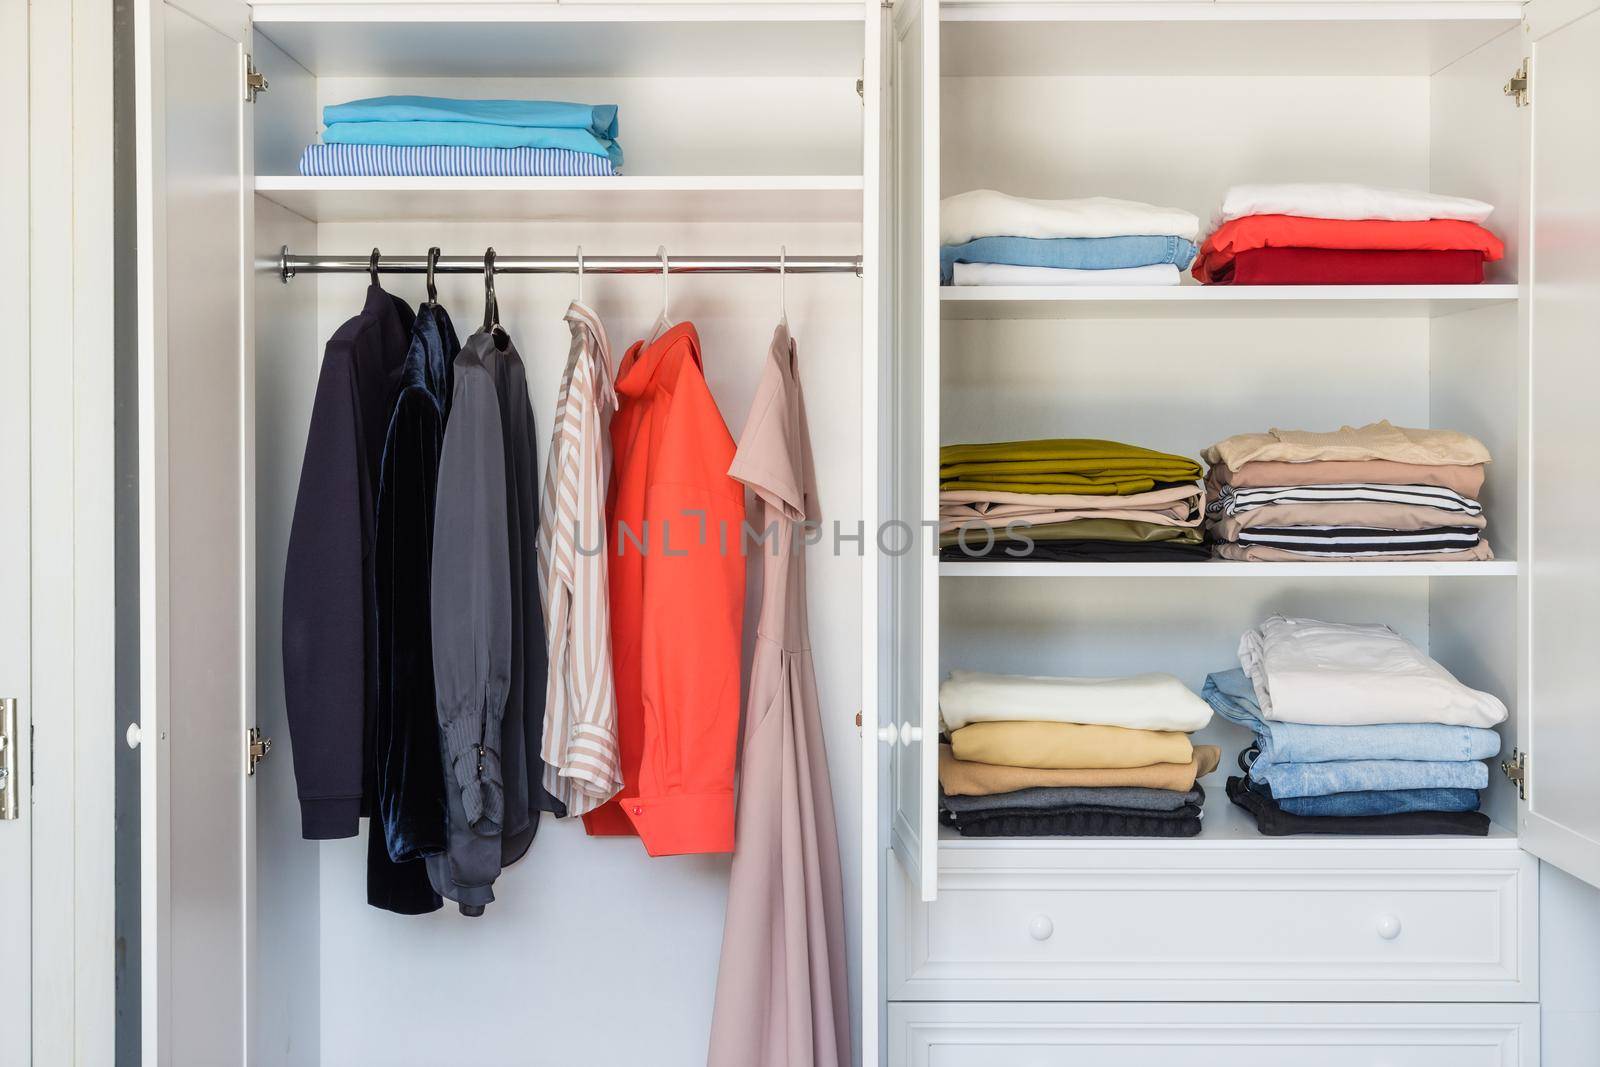 Close-up, open white closet in which blouses, dresses and jackets hang. Burdened minimalist approach to clothing selection. Working with a stylist to select a basic collection of things